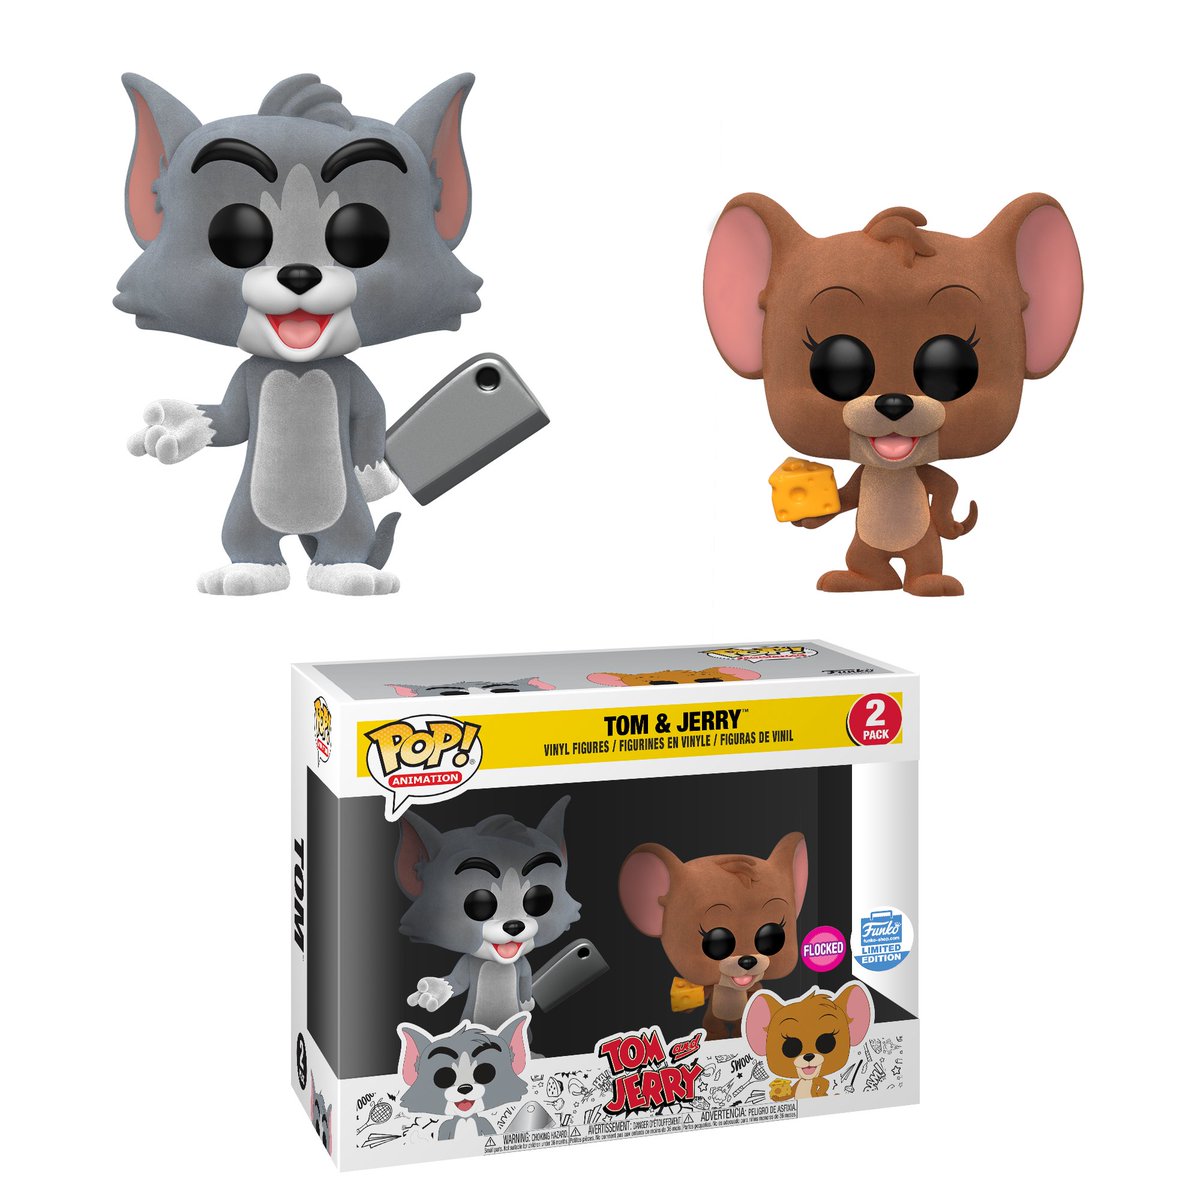 neutrale Volharding Jongleren Funko on Twitter: "RT &amp; follow @OriginalFunko for a chance to win a  Funko Shop Exclusive Flocked Tom and Jerry Pop! 2-Pack!  https://t.co/oNiWzd2xF0" / Twitter